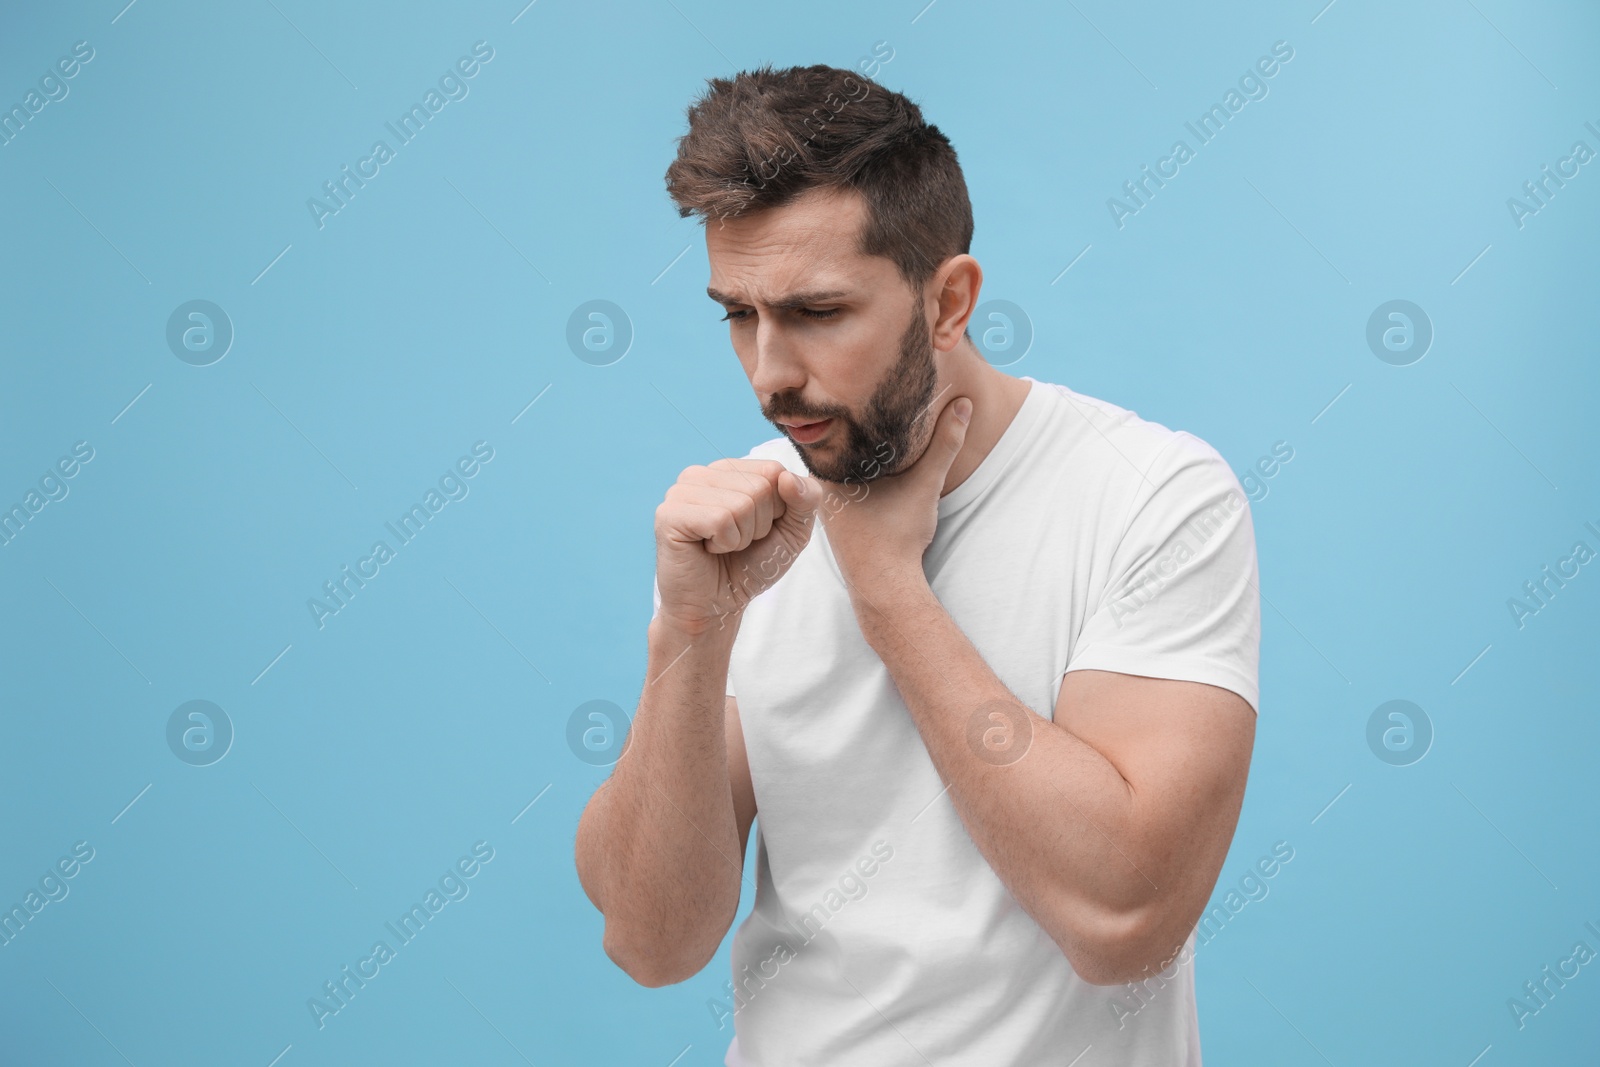 Photo of Man coughing on light blue background, space for text. Cold symptoms